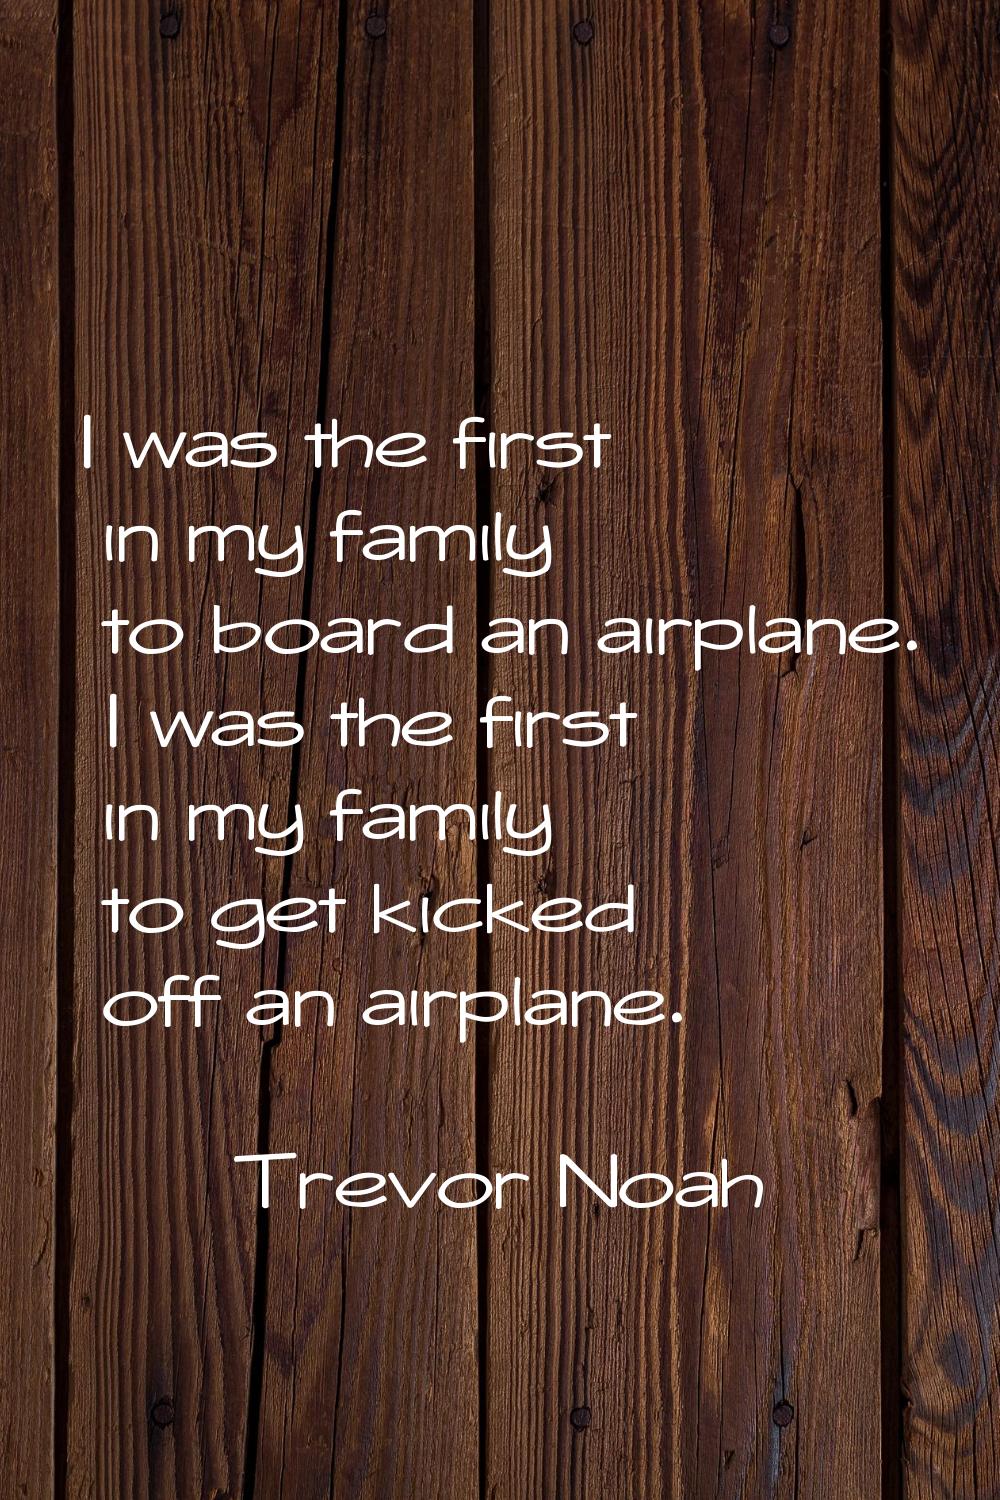 I was the first in my family to board an airplane. I was the first in my family to get kicked off a